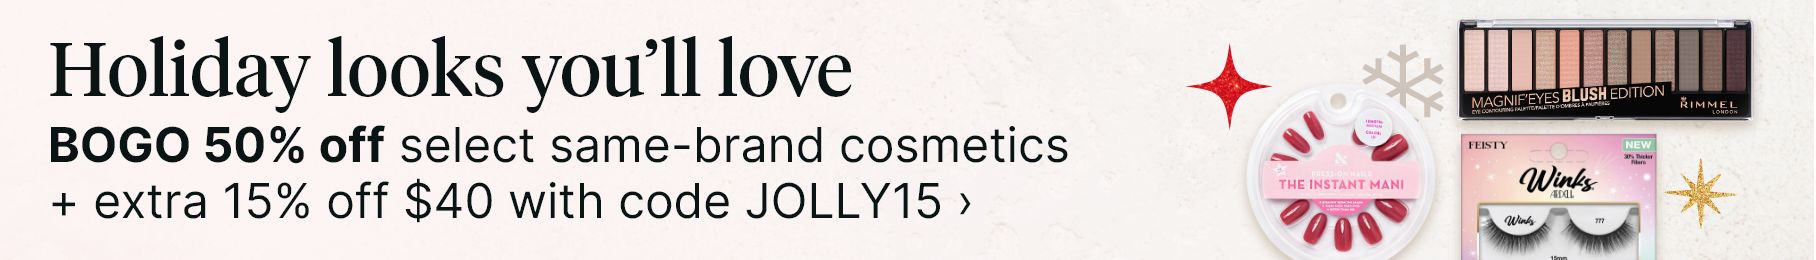 Holiday looks you'll love. BOGO 50% off select same-brand cosmetics + extra 15% off $40 with code JOLLY15.